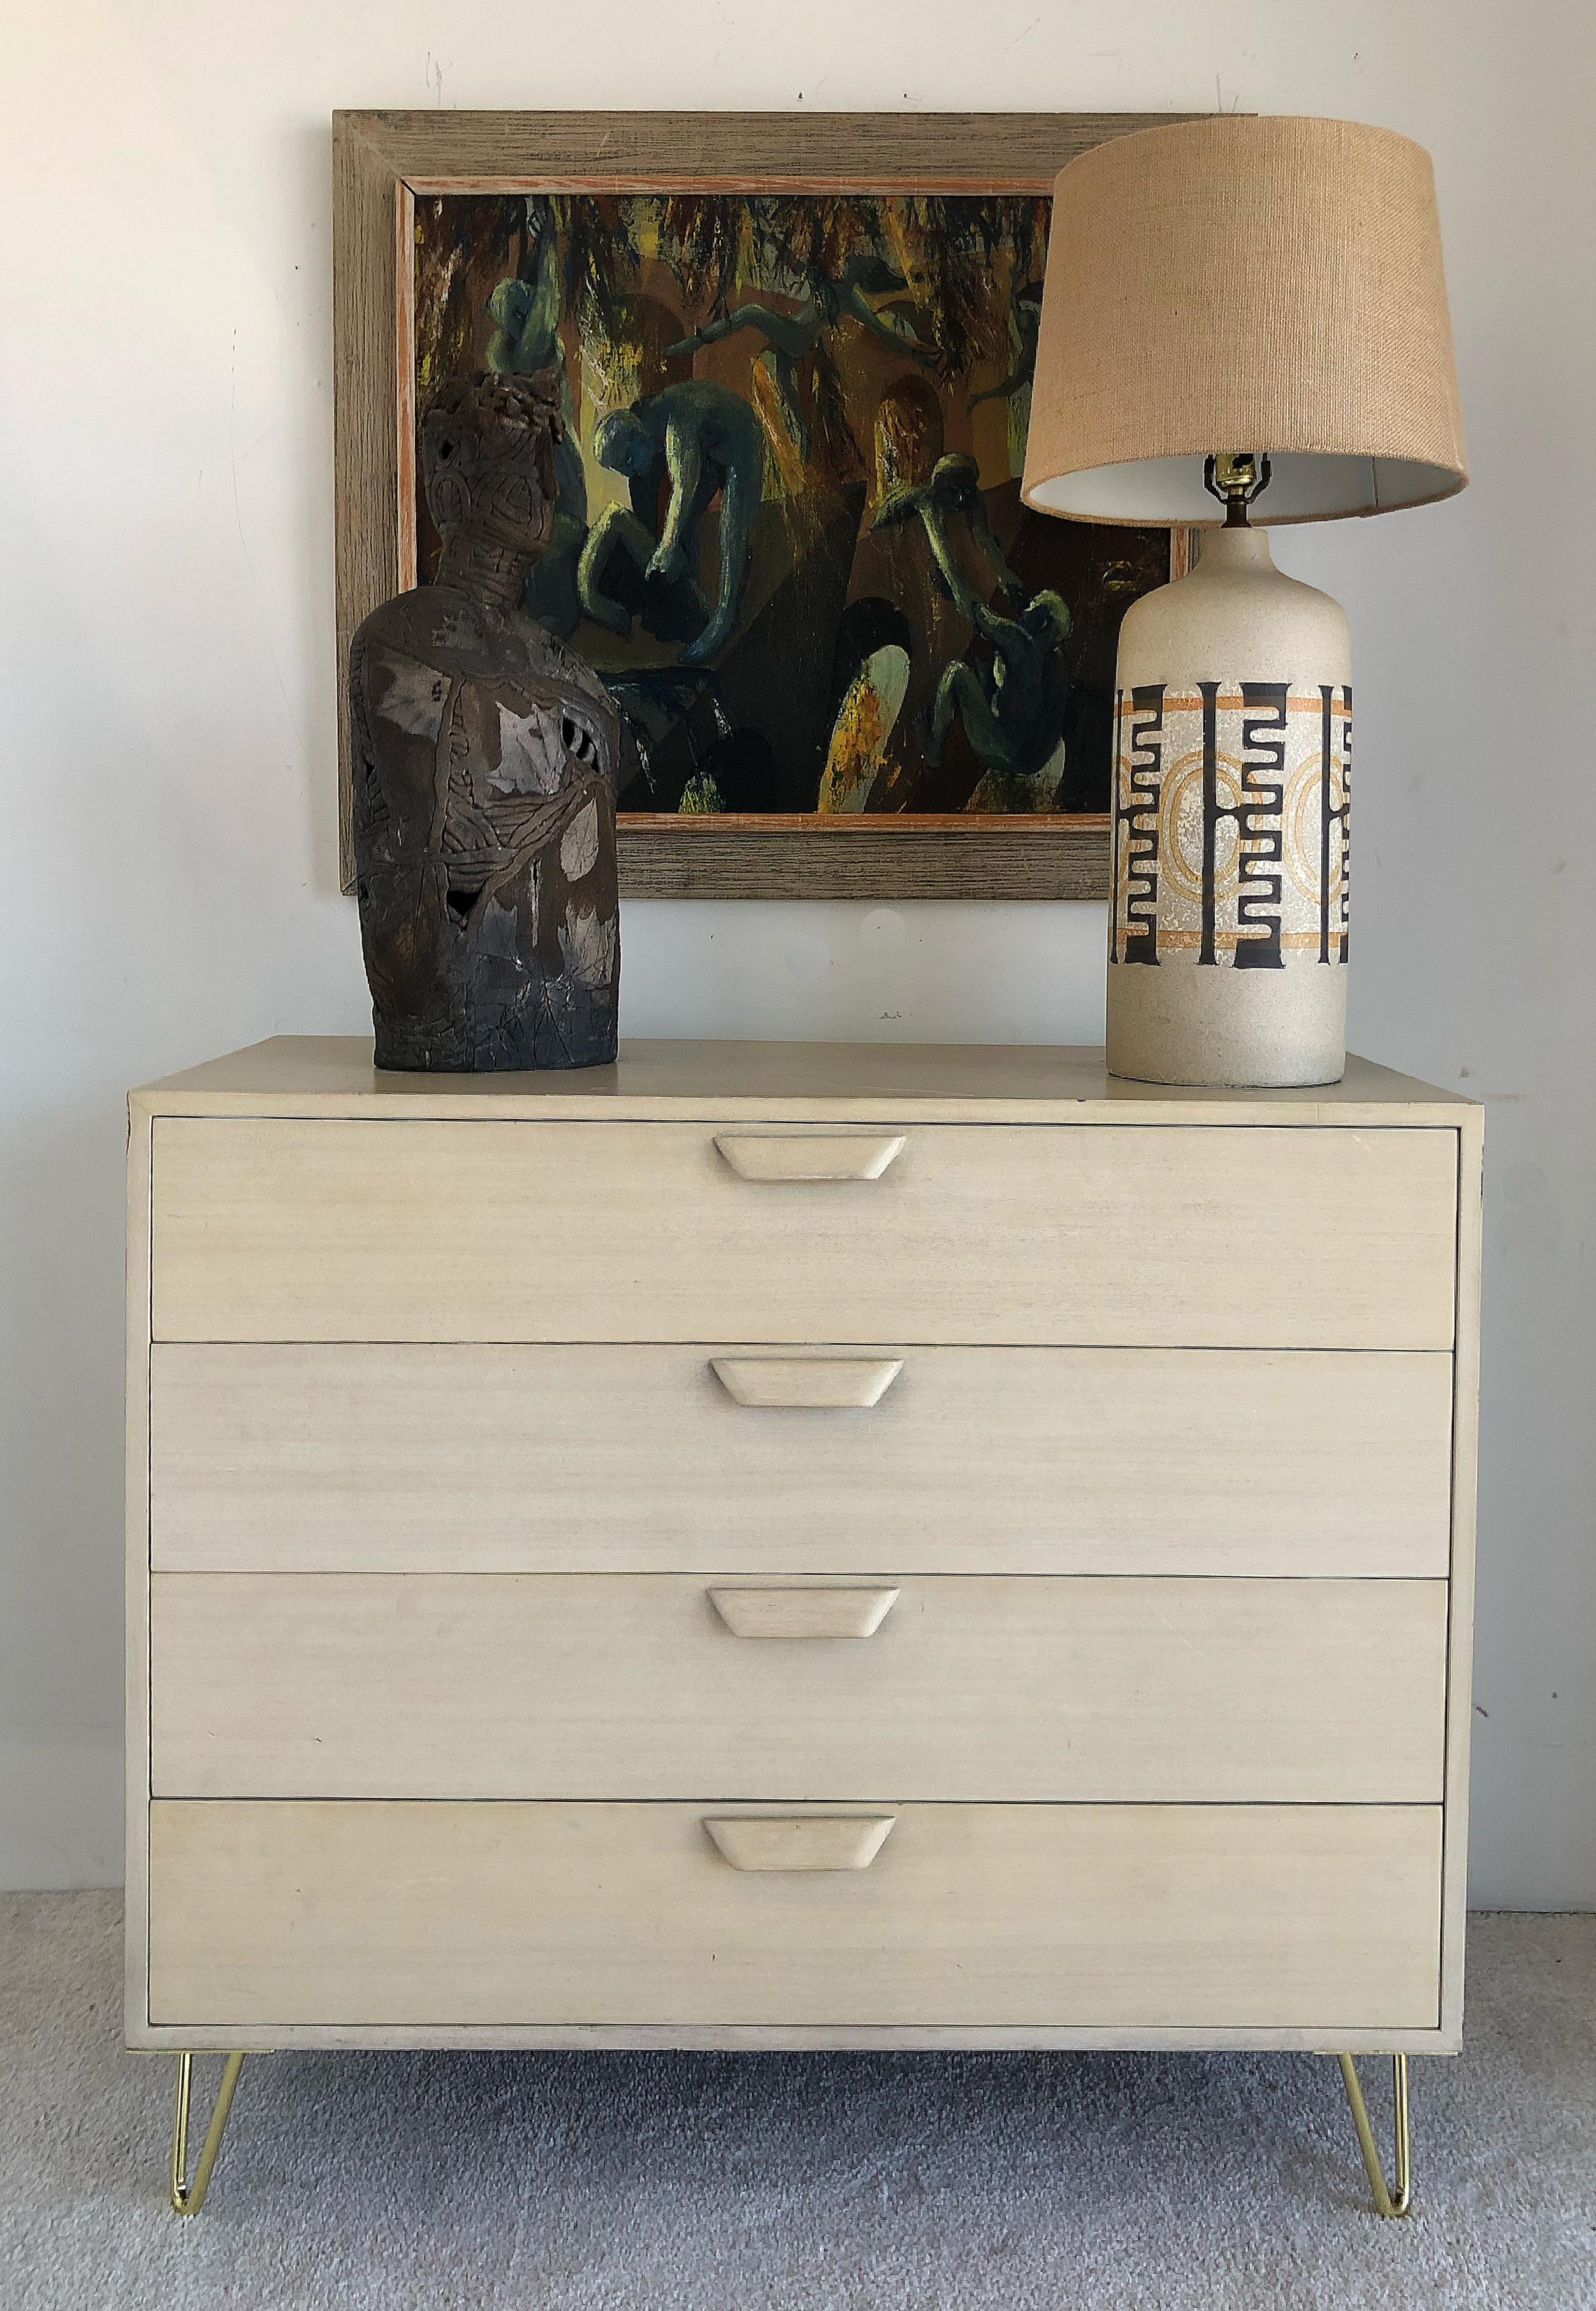 Mid-Century Modern Harvey Prober dresser with hairpin legs

Offered for sale is a Mid-Century Modern dresser by the iconic American designer Harvey Probber. The dresser has four drawers with dividers in the top drawer. It retains the original